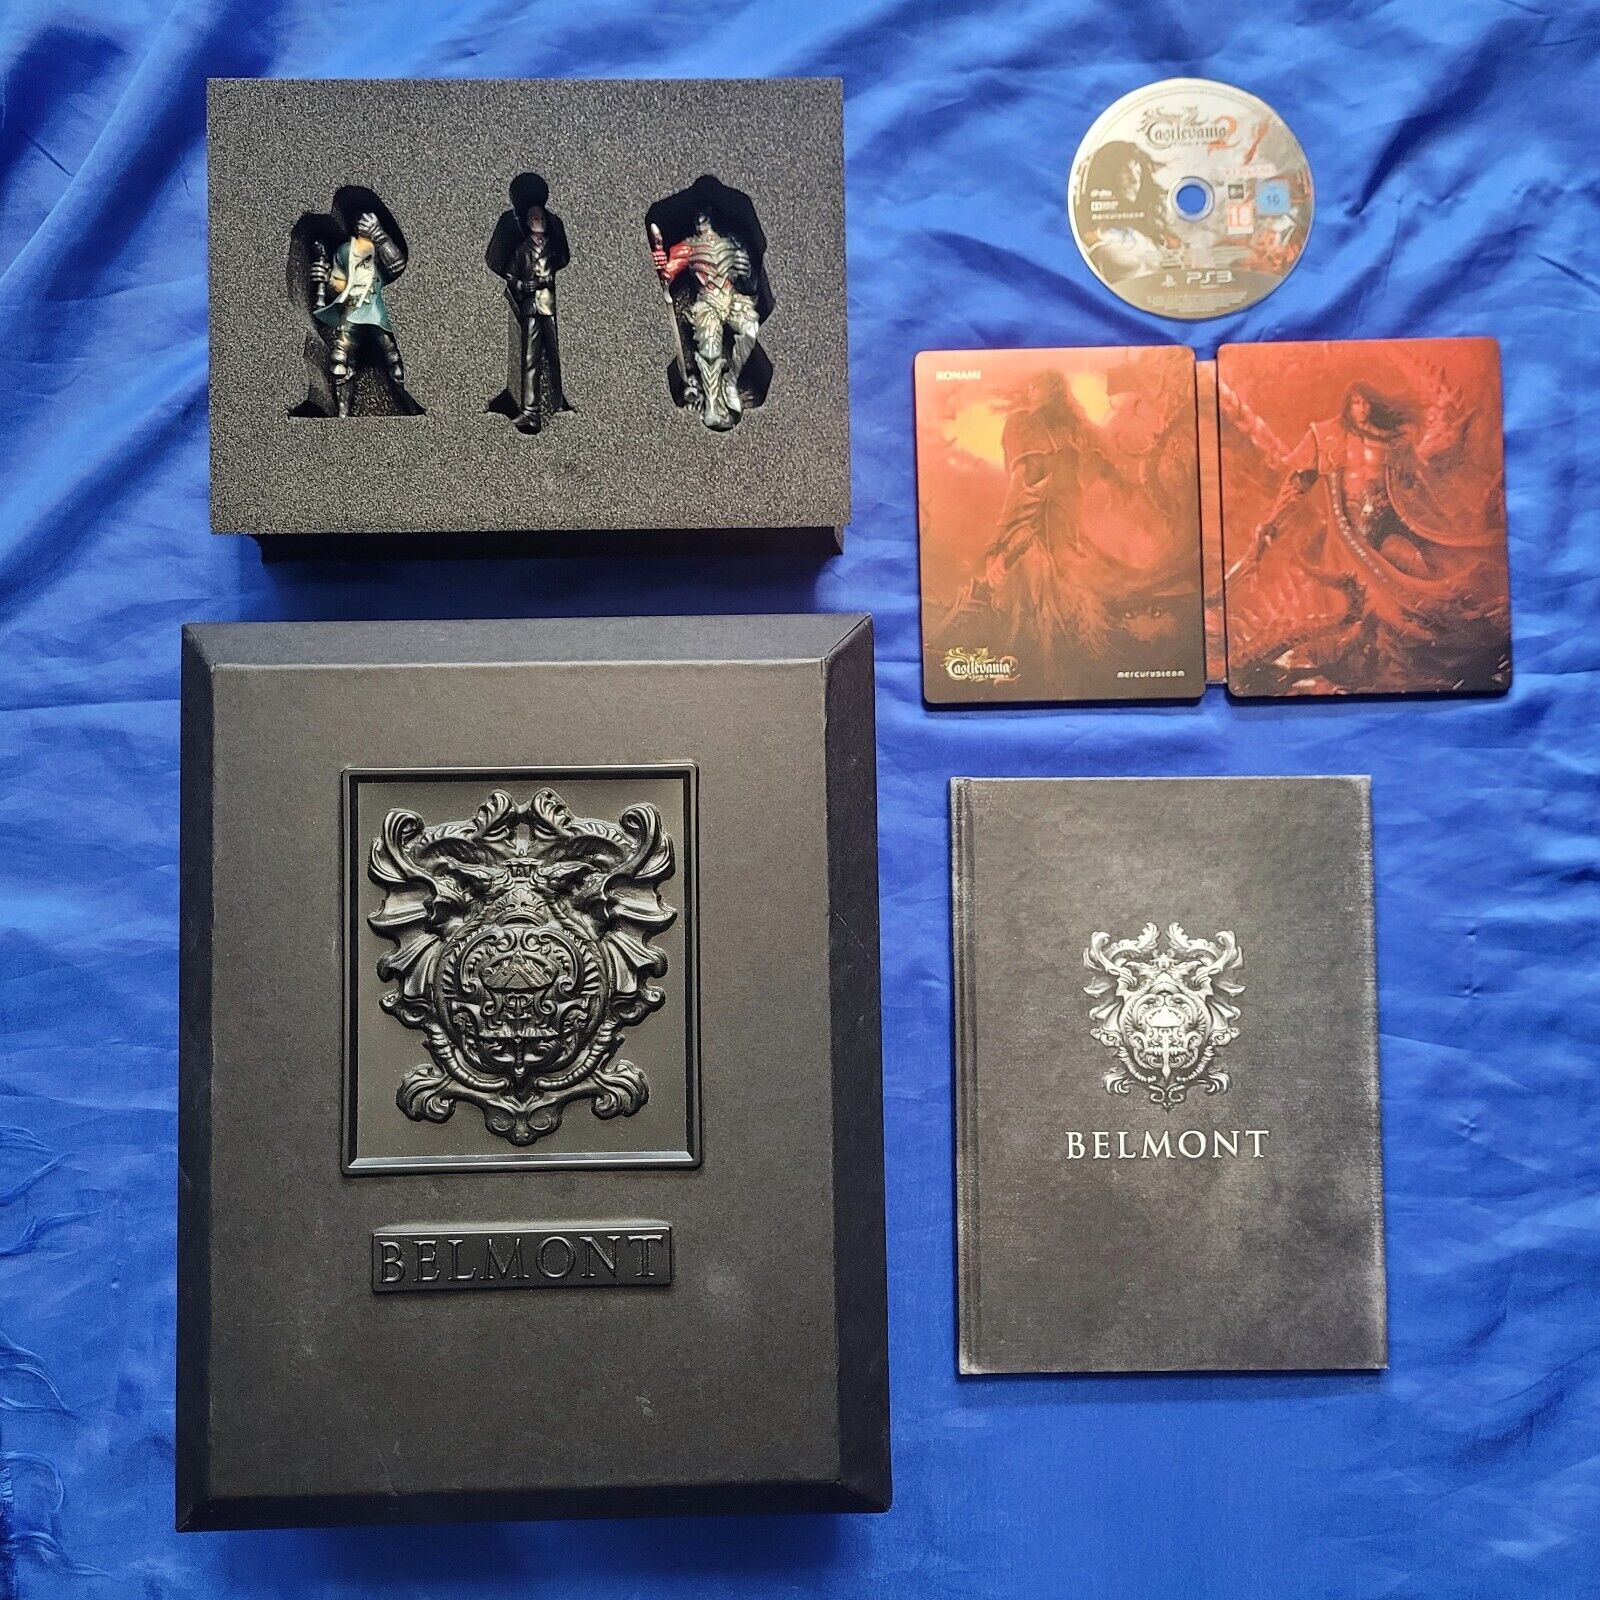 Castlevania: Lords of Shadow Collection Steelbook PAL Version UK